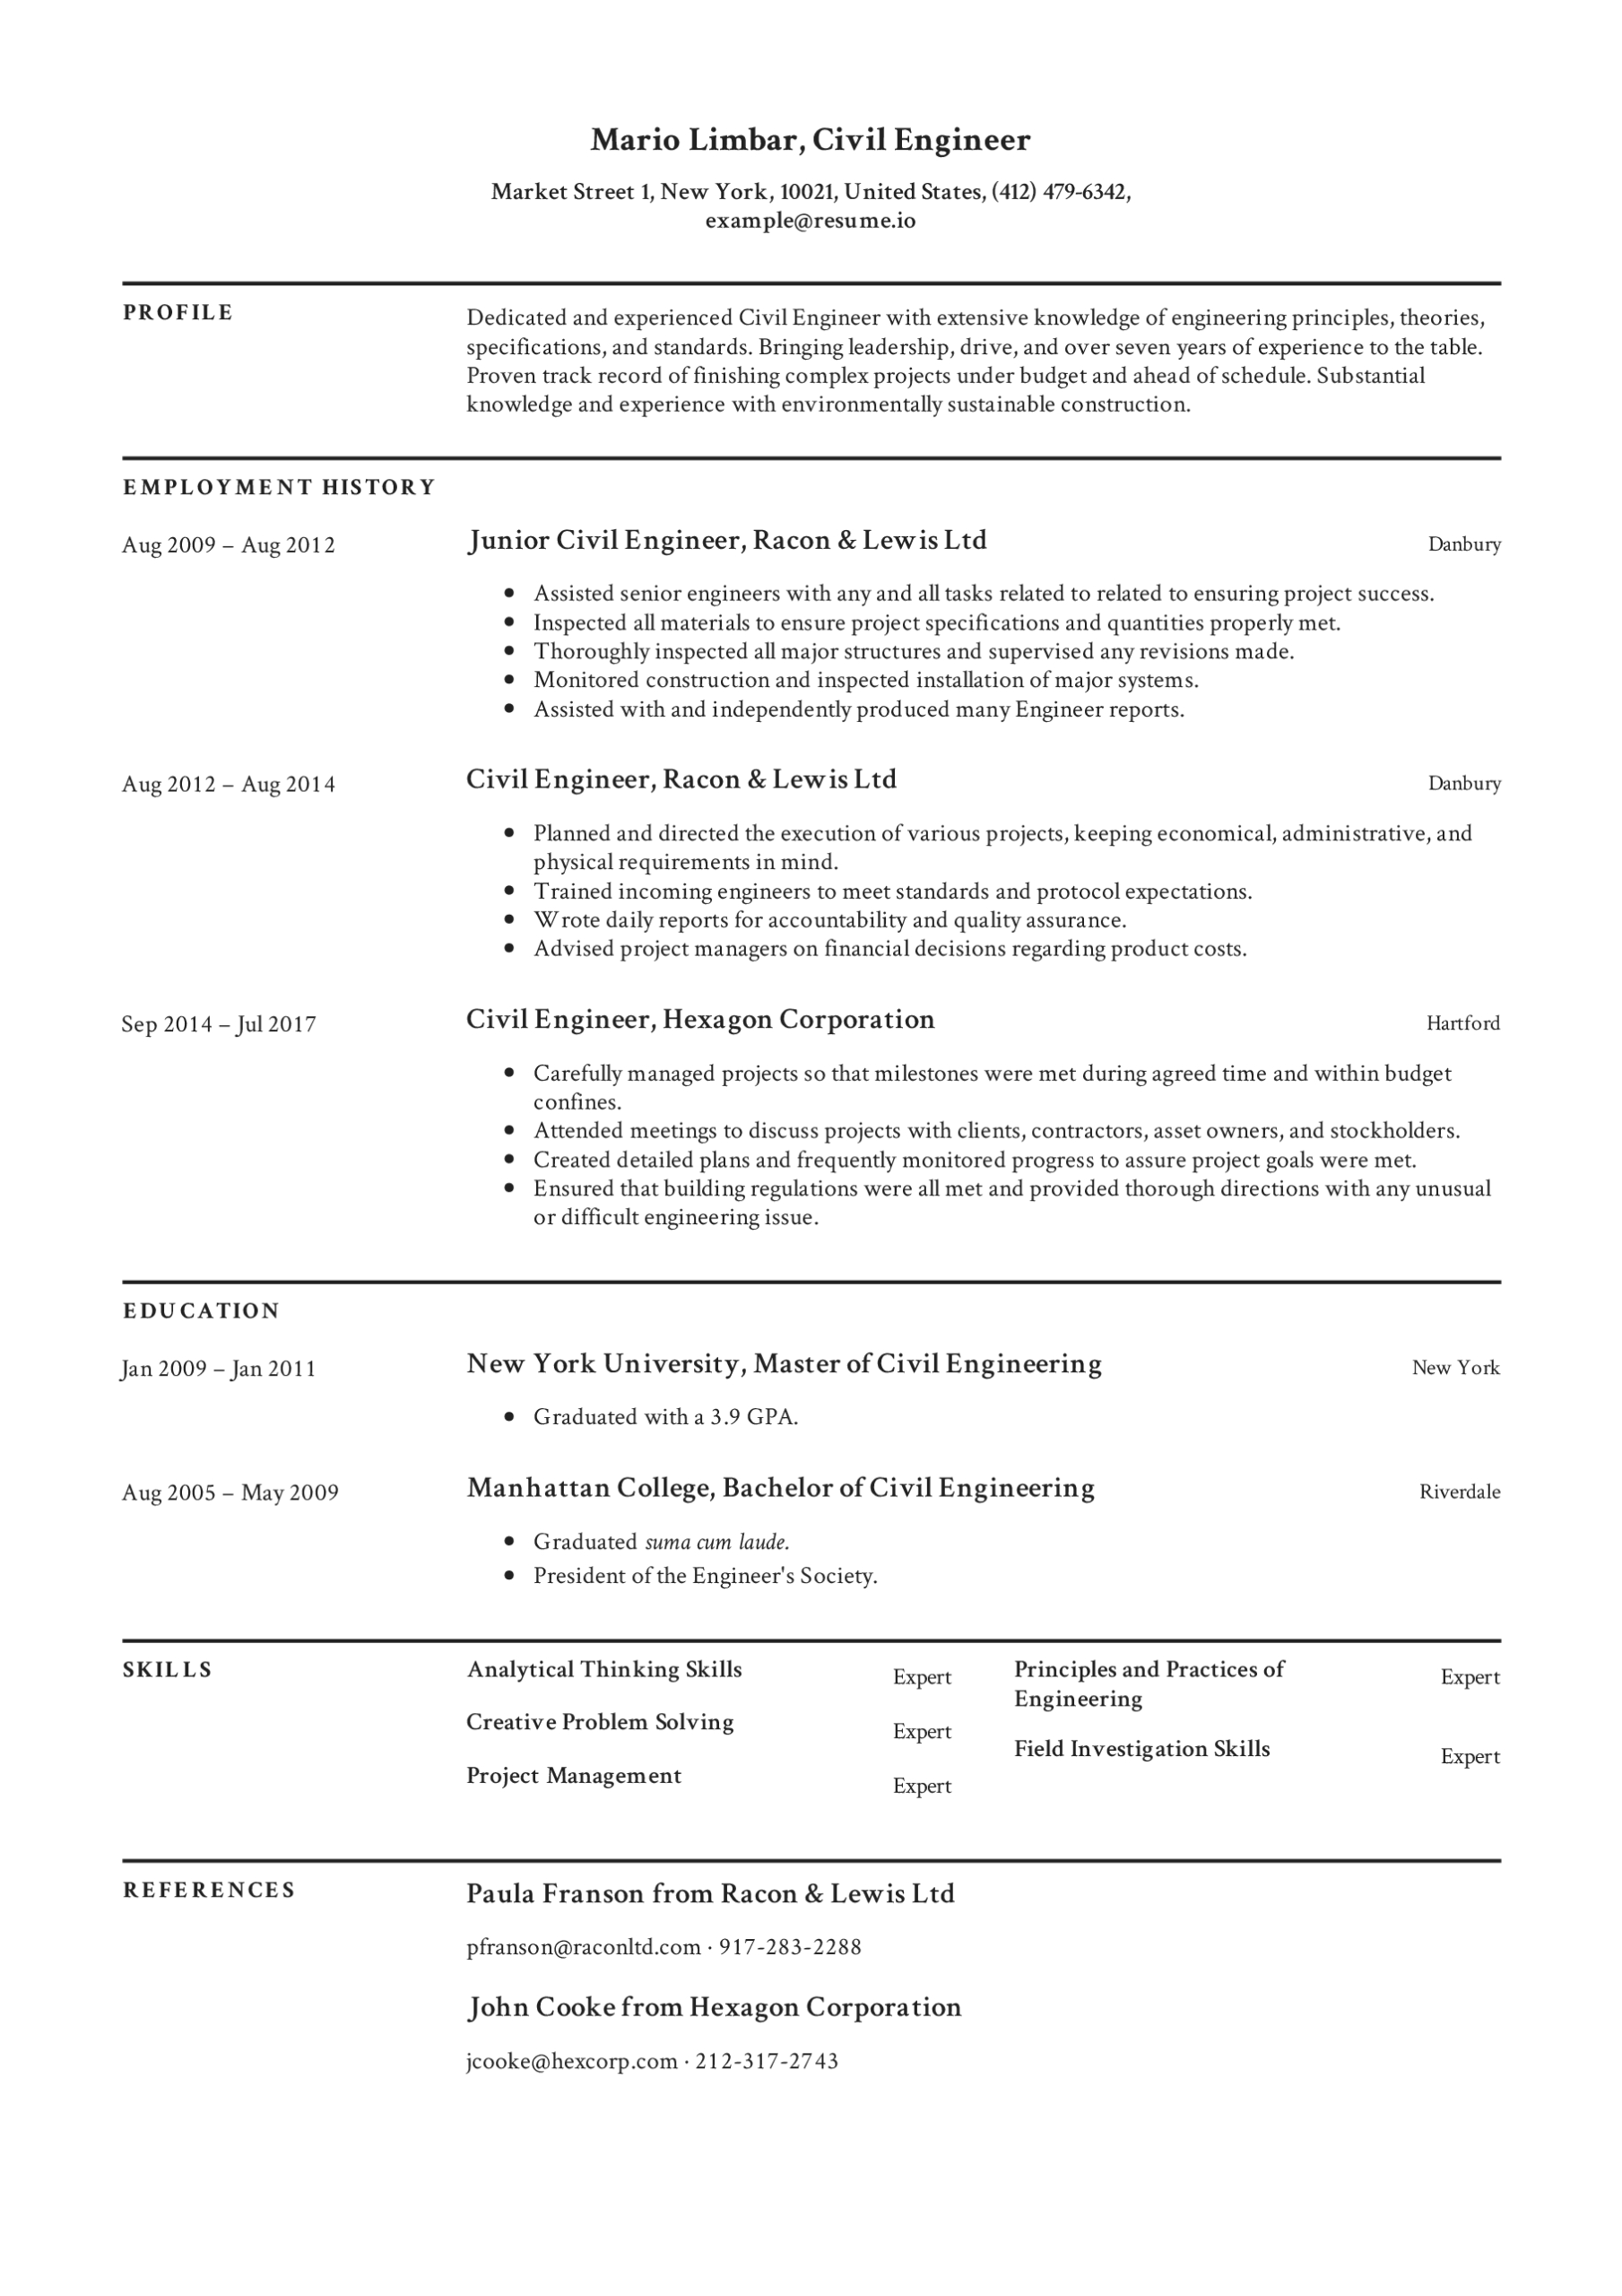 Civil Engineer Resume Templates 2020 (Free Download) · Resume.io Inside Country Report Template Middle School